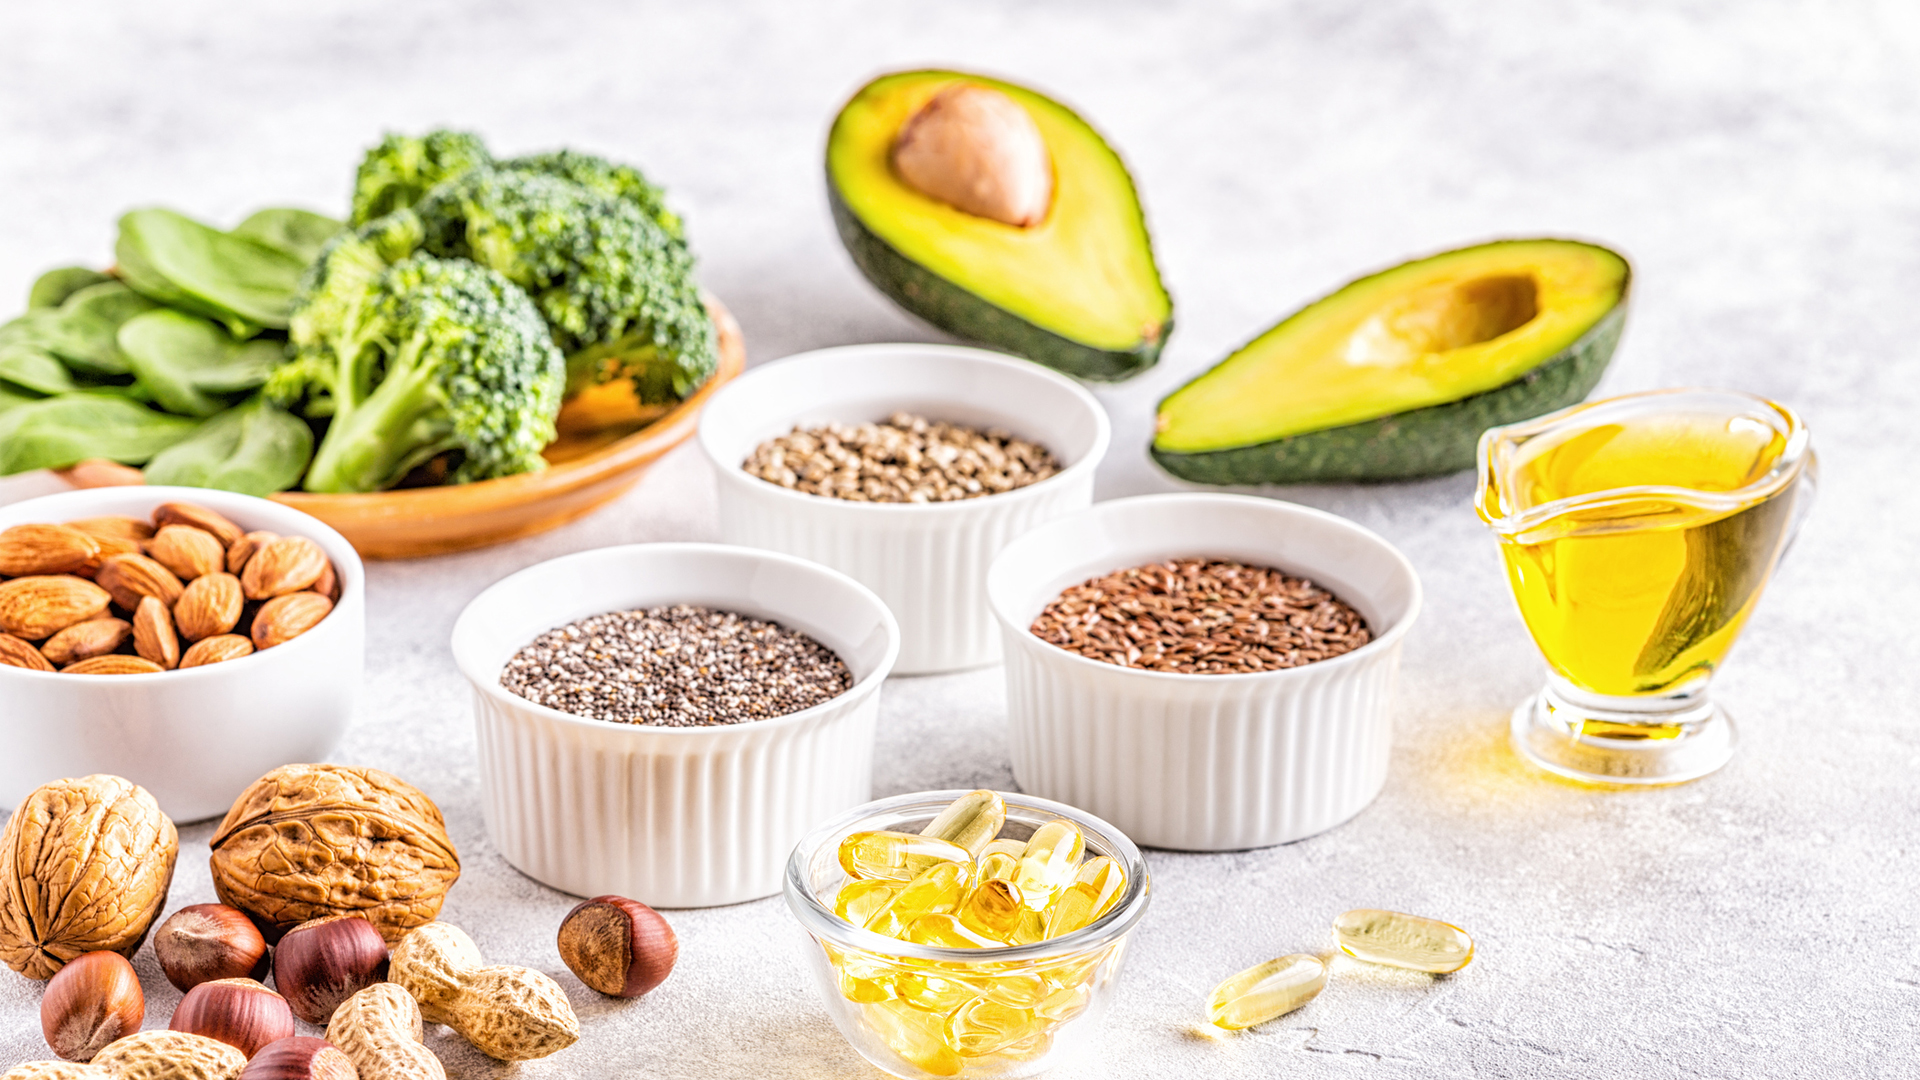 healthy sources of unsaturated fats, including olive oil, nuts, seeds, and avocado